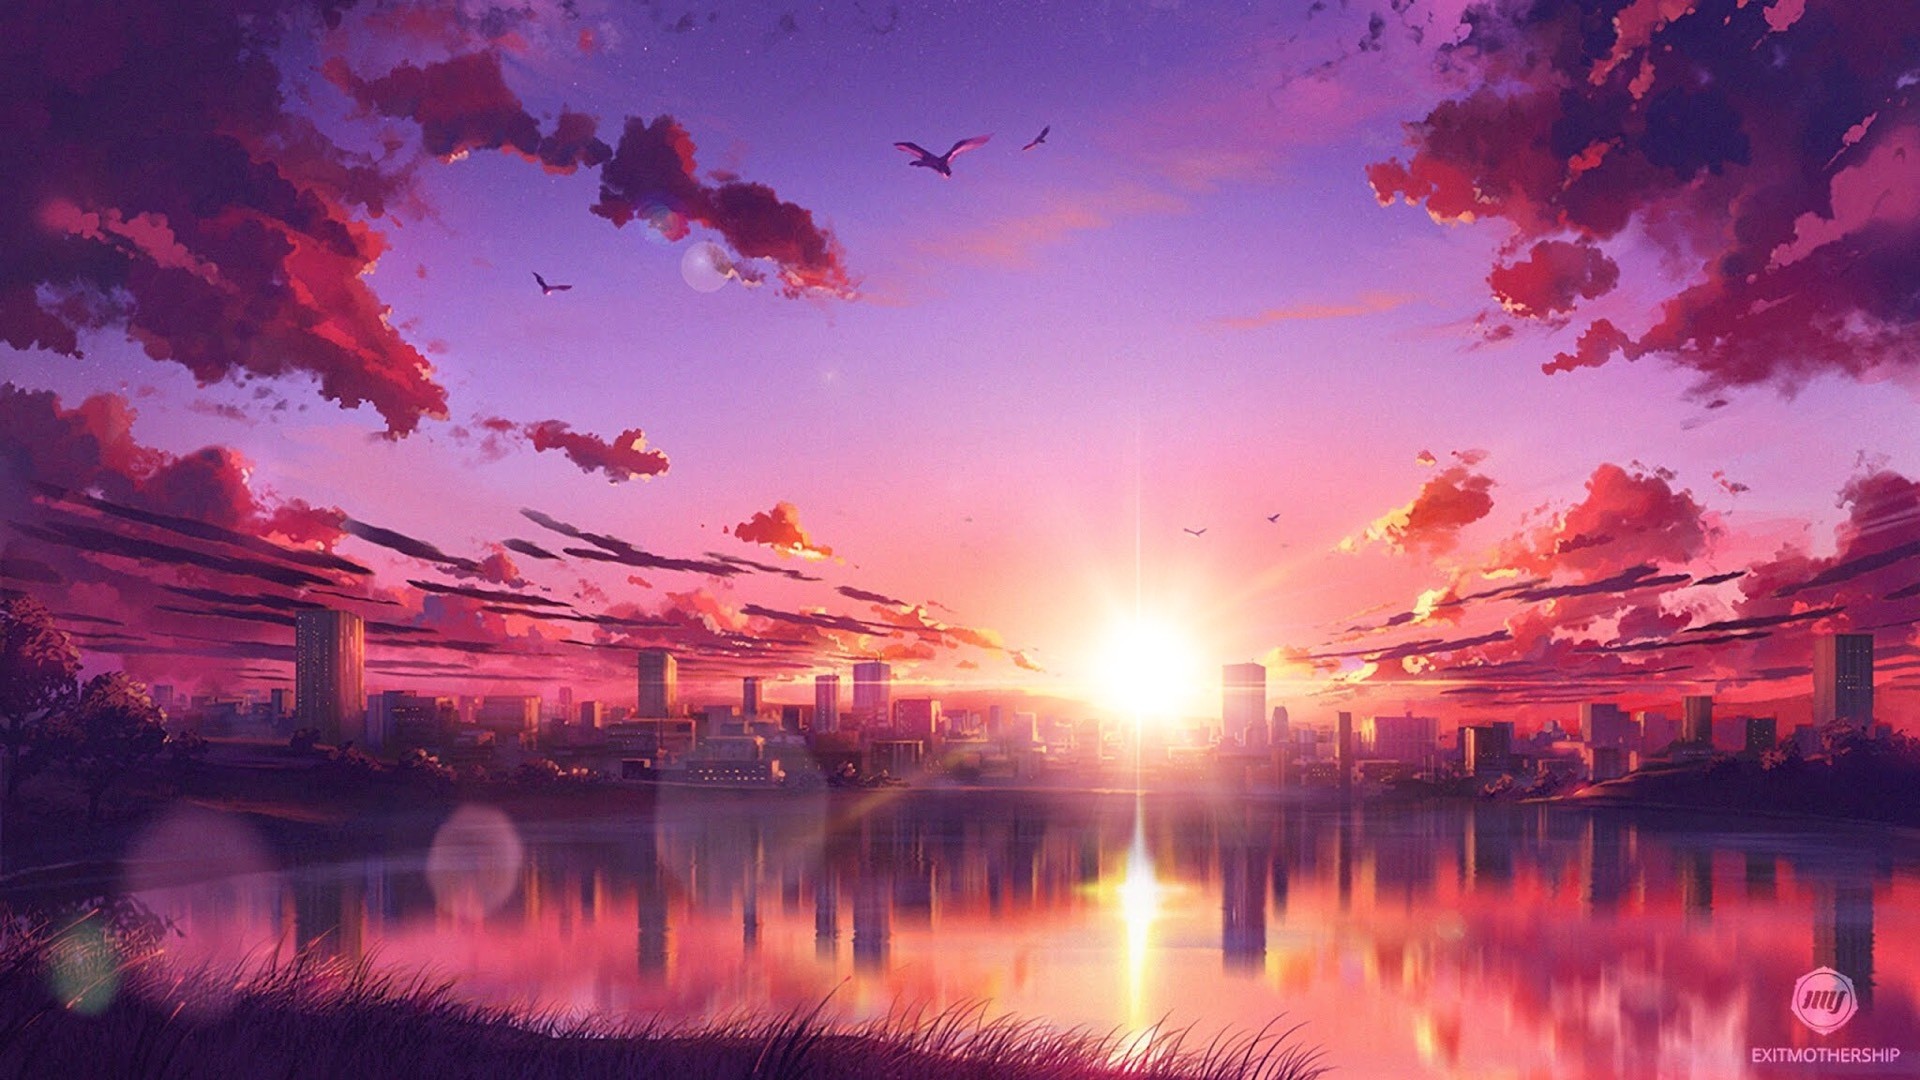 painted Anime Nature Environment Backgroundのイラスト素材 [94077691] - PIXTA